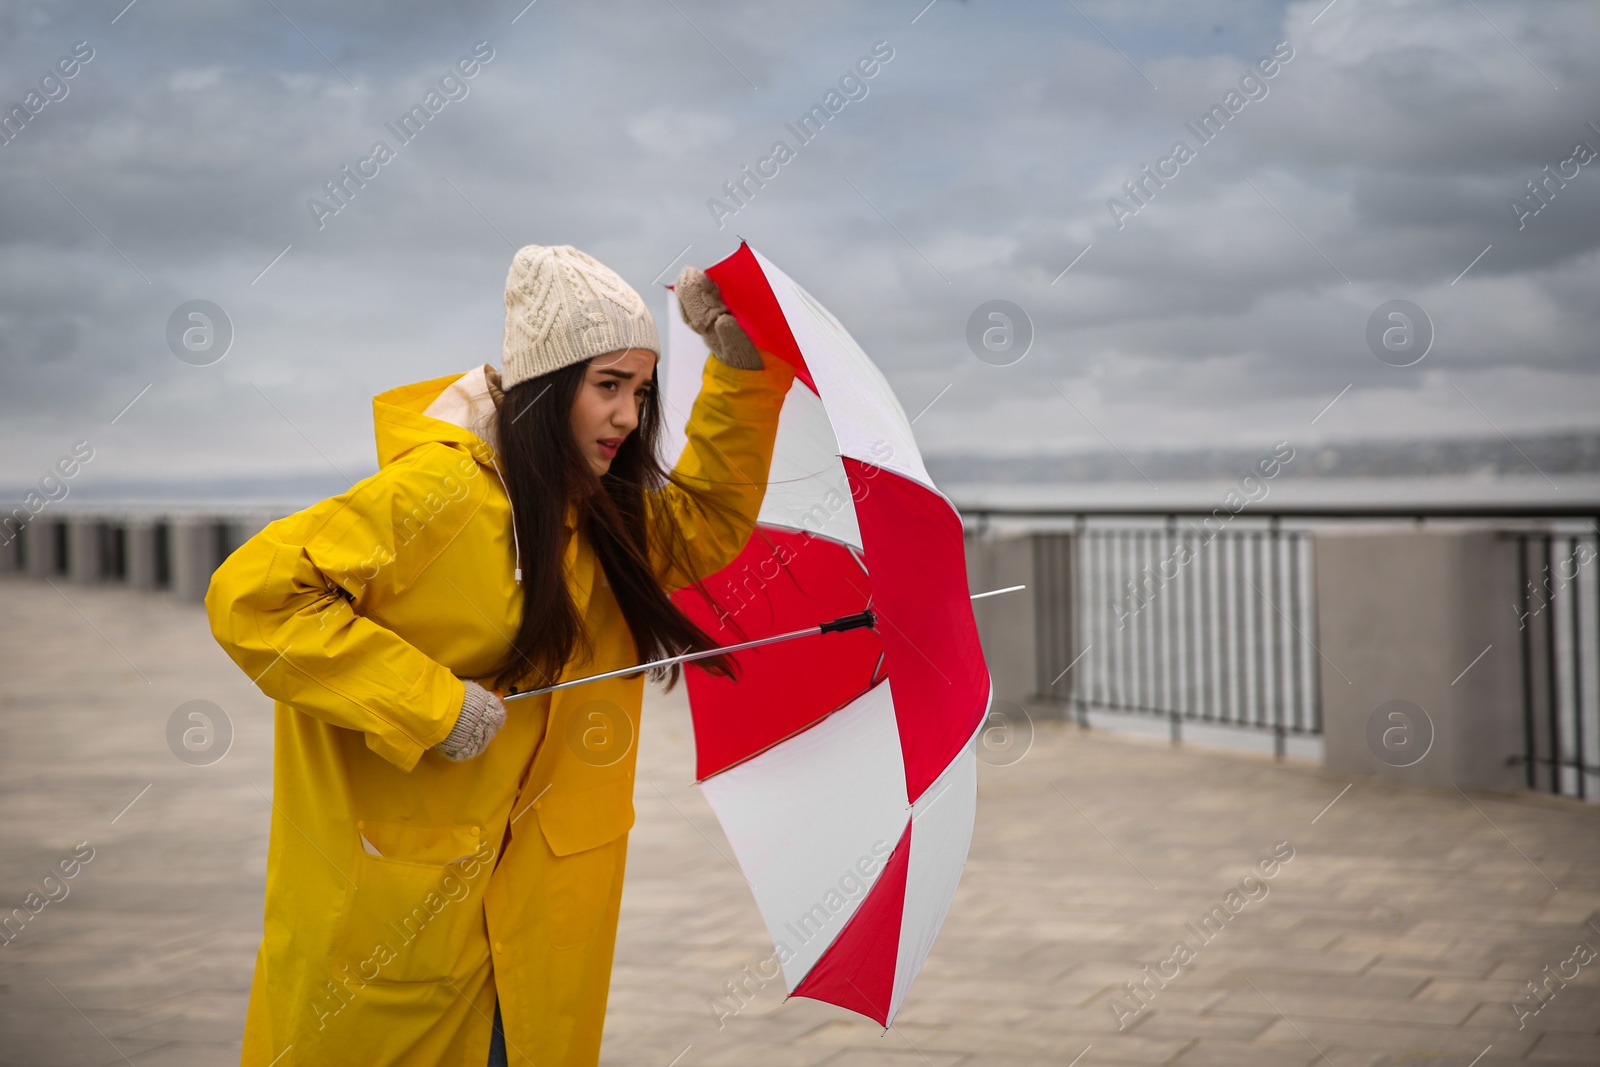 Photo of Woman in yellow raincoat with umbrella caught in gust of wind outdoors